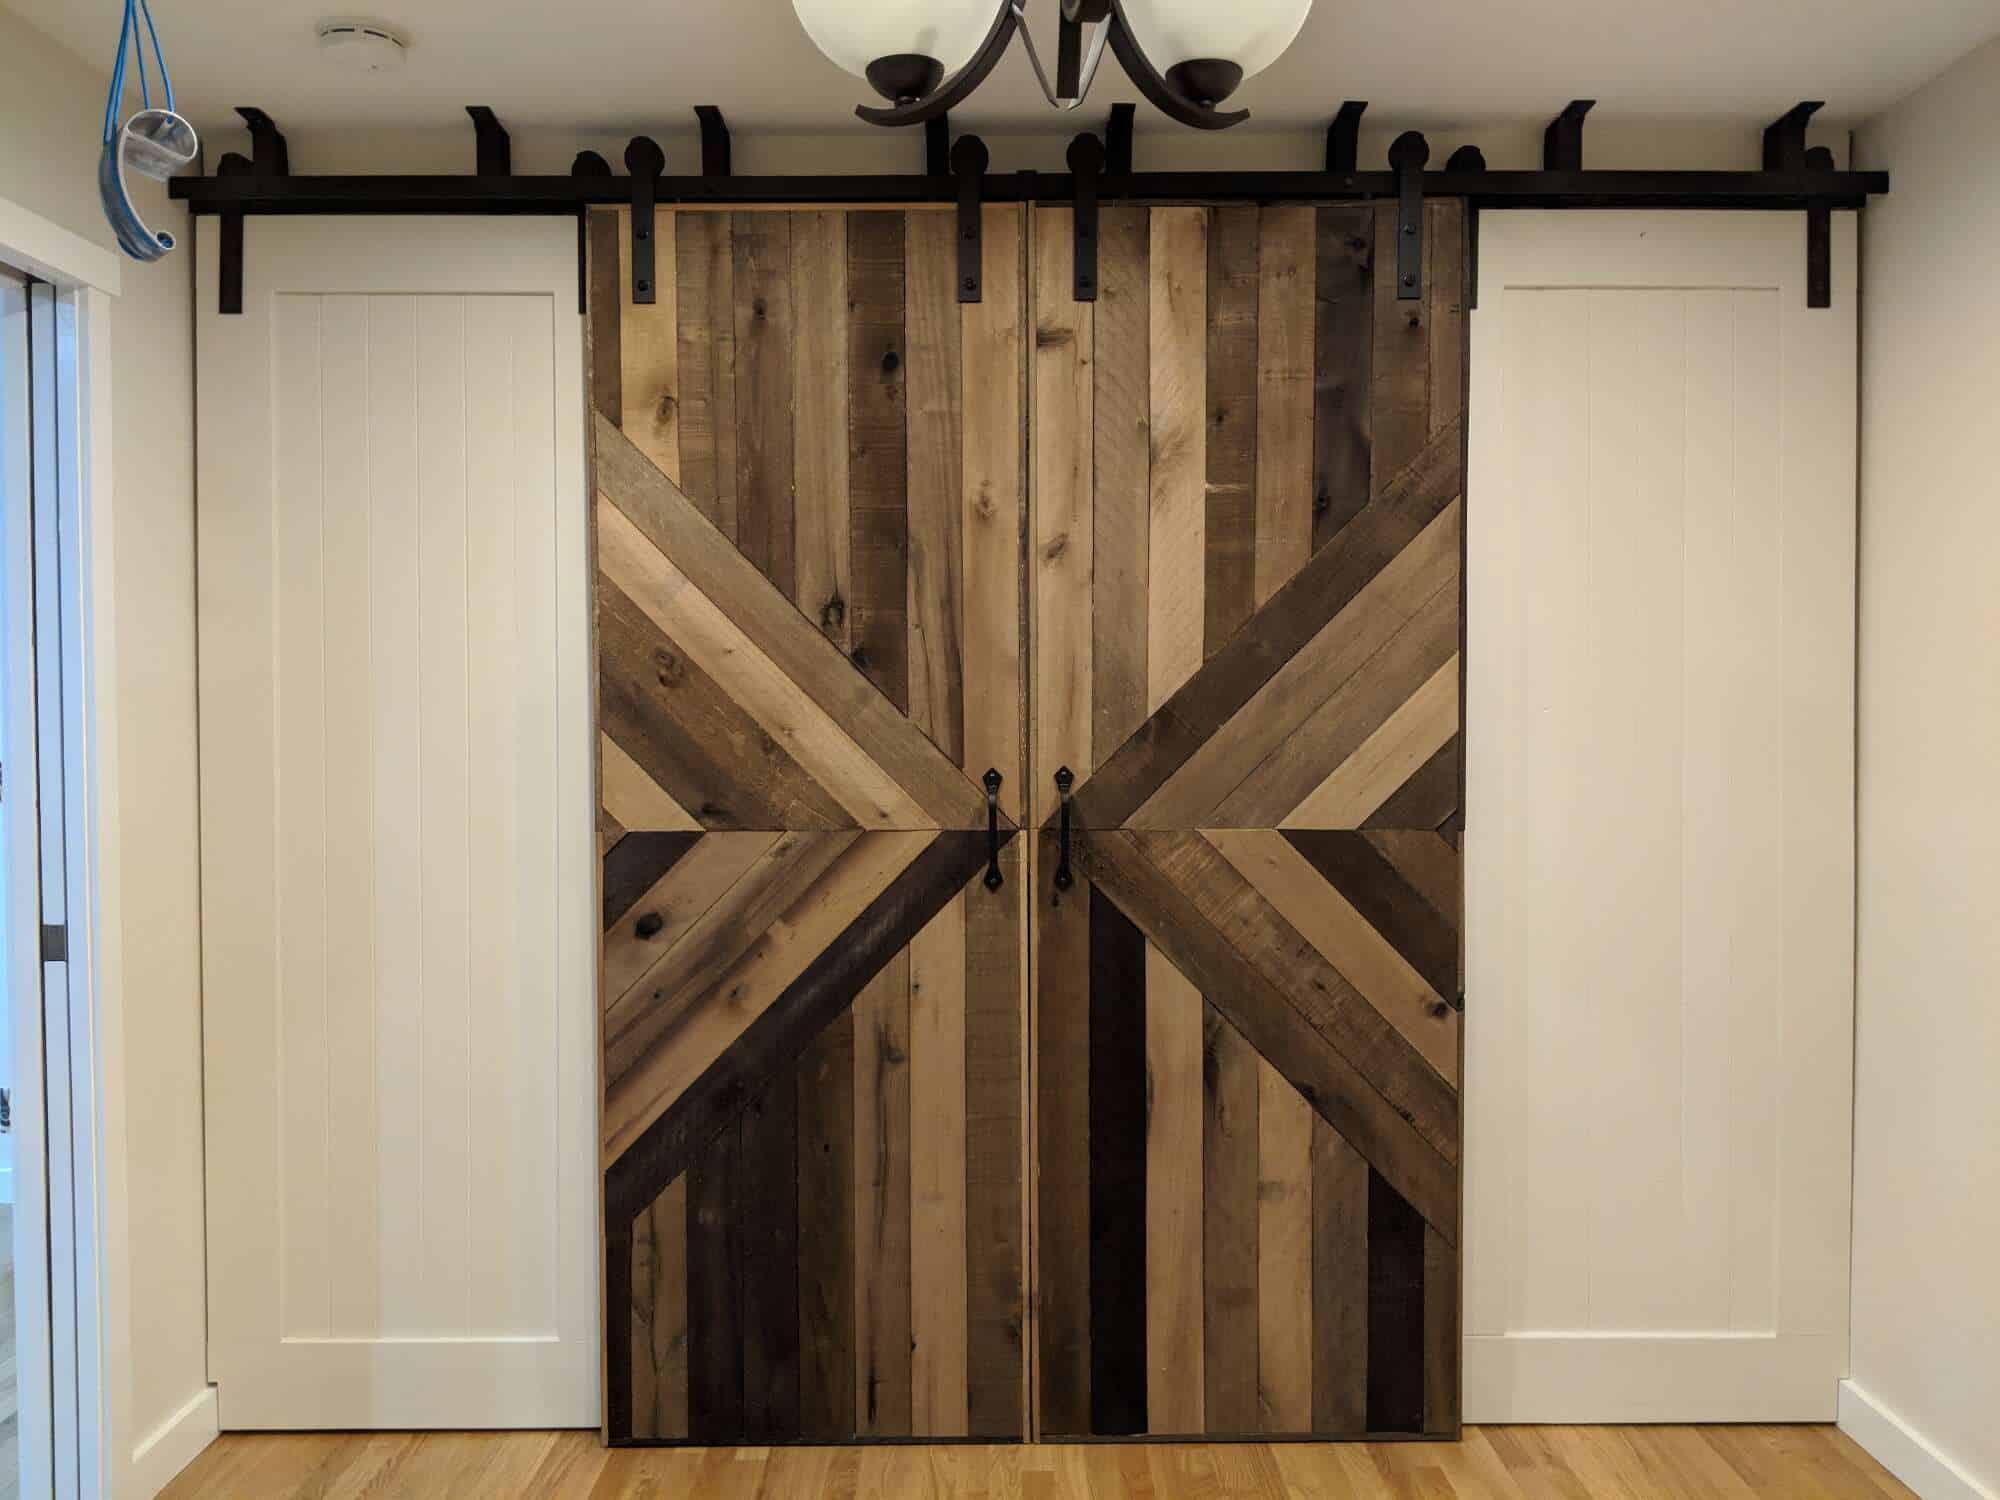 What You Will Need to Hang a Barn Door from the Ceiling